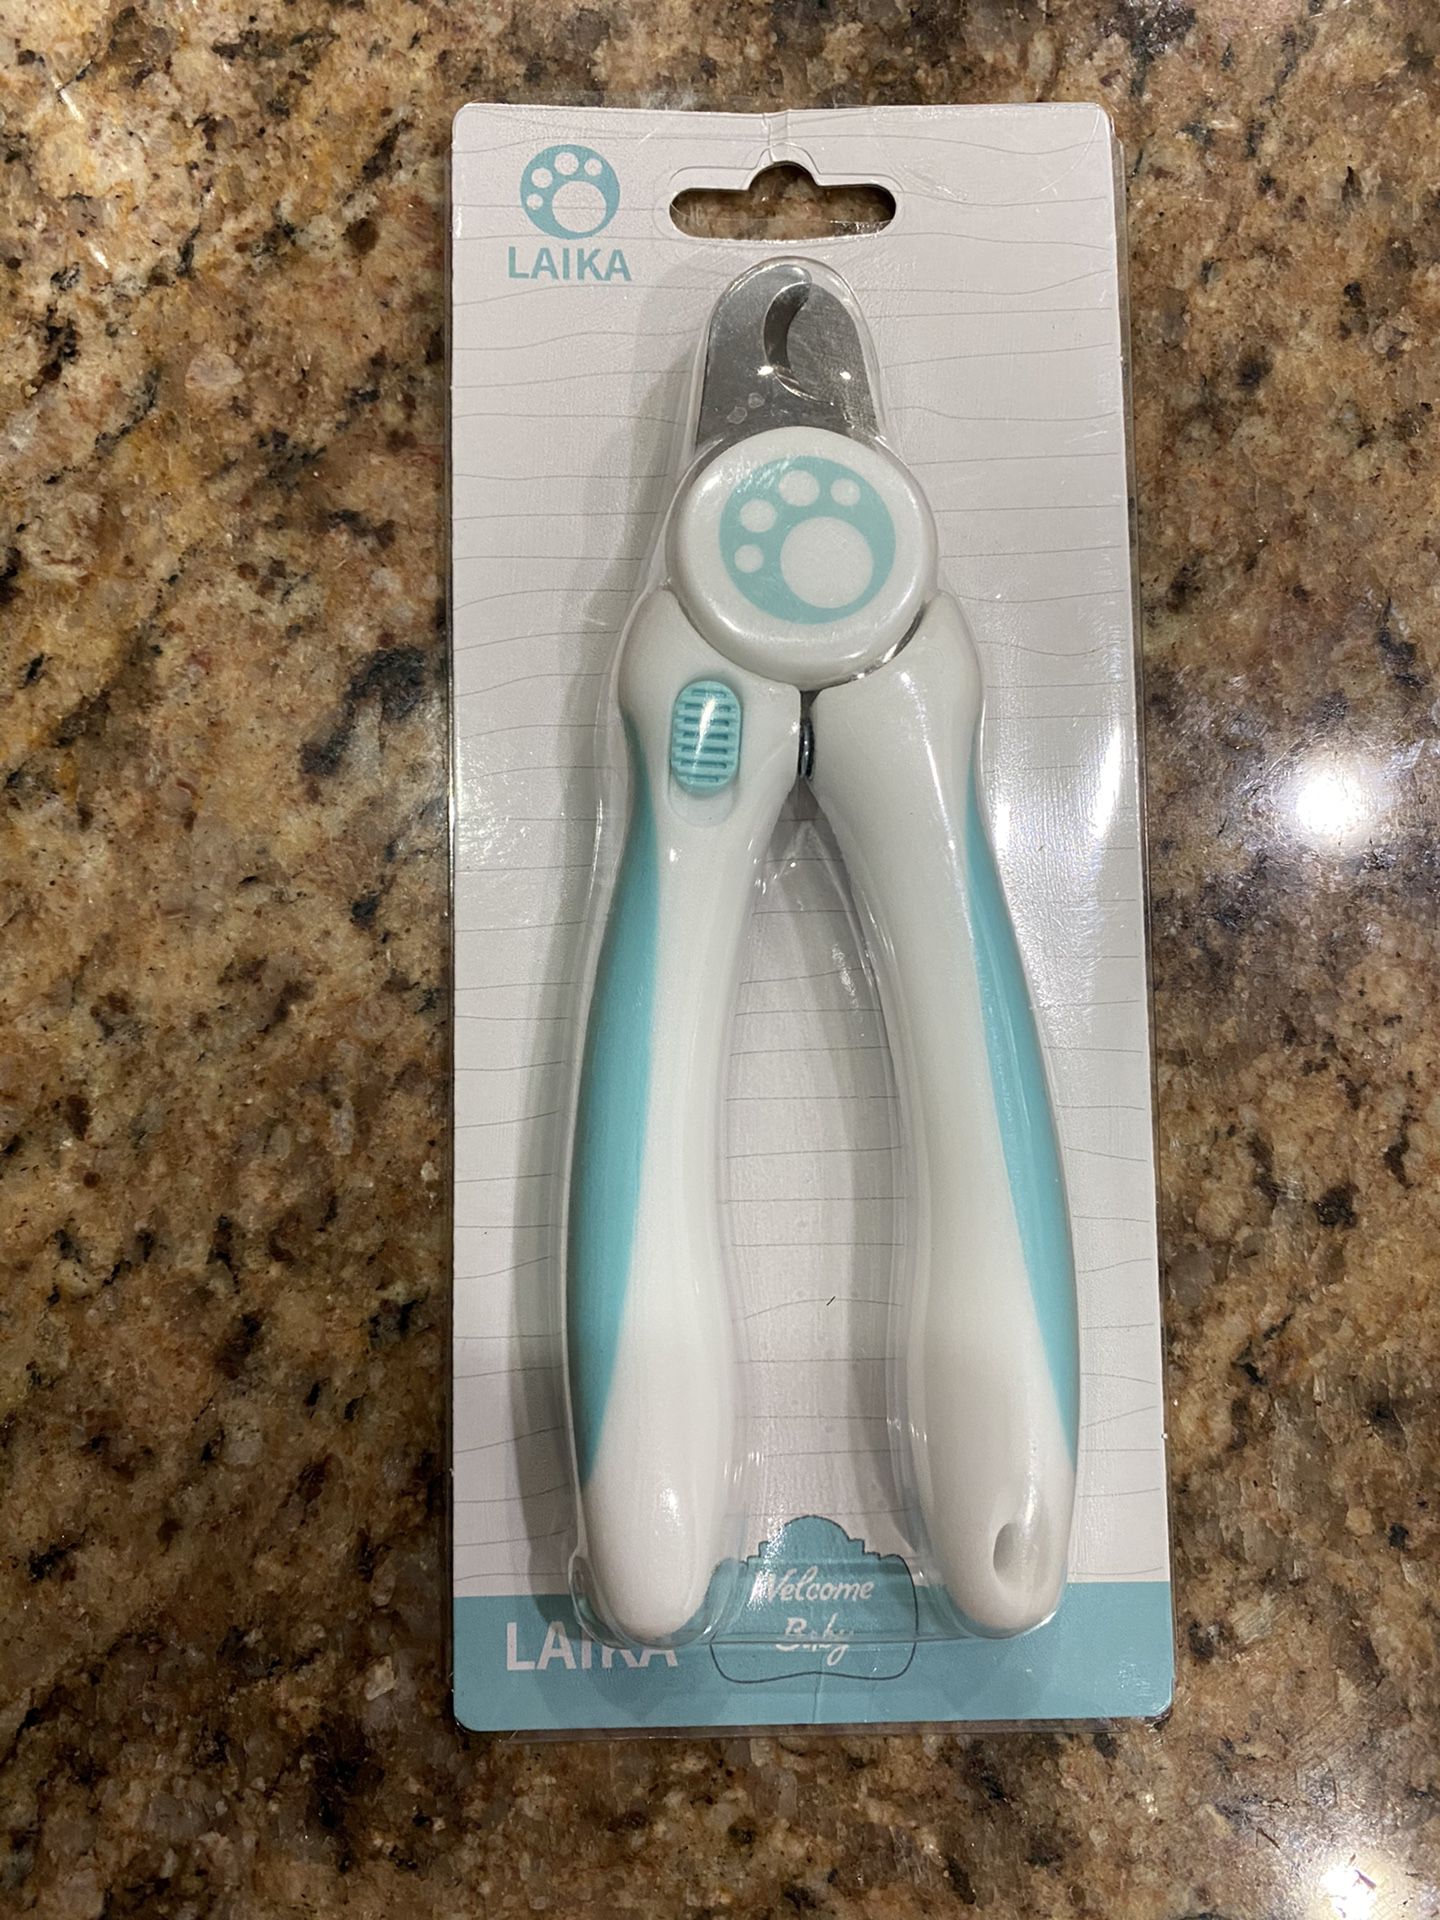 LAIKA Dog Nail Clippers and Trimmer - with Safety Guard to Avoid Over-Cutting Nails & Free Nail File - Razor Sharp Blades - Sturdy Non Slip Handles -